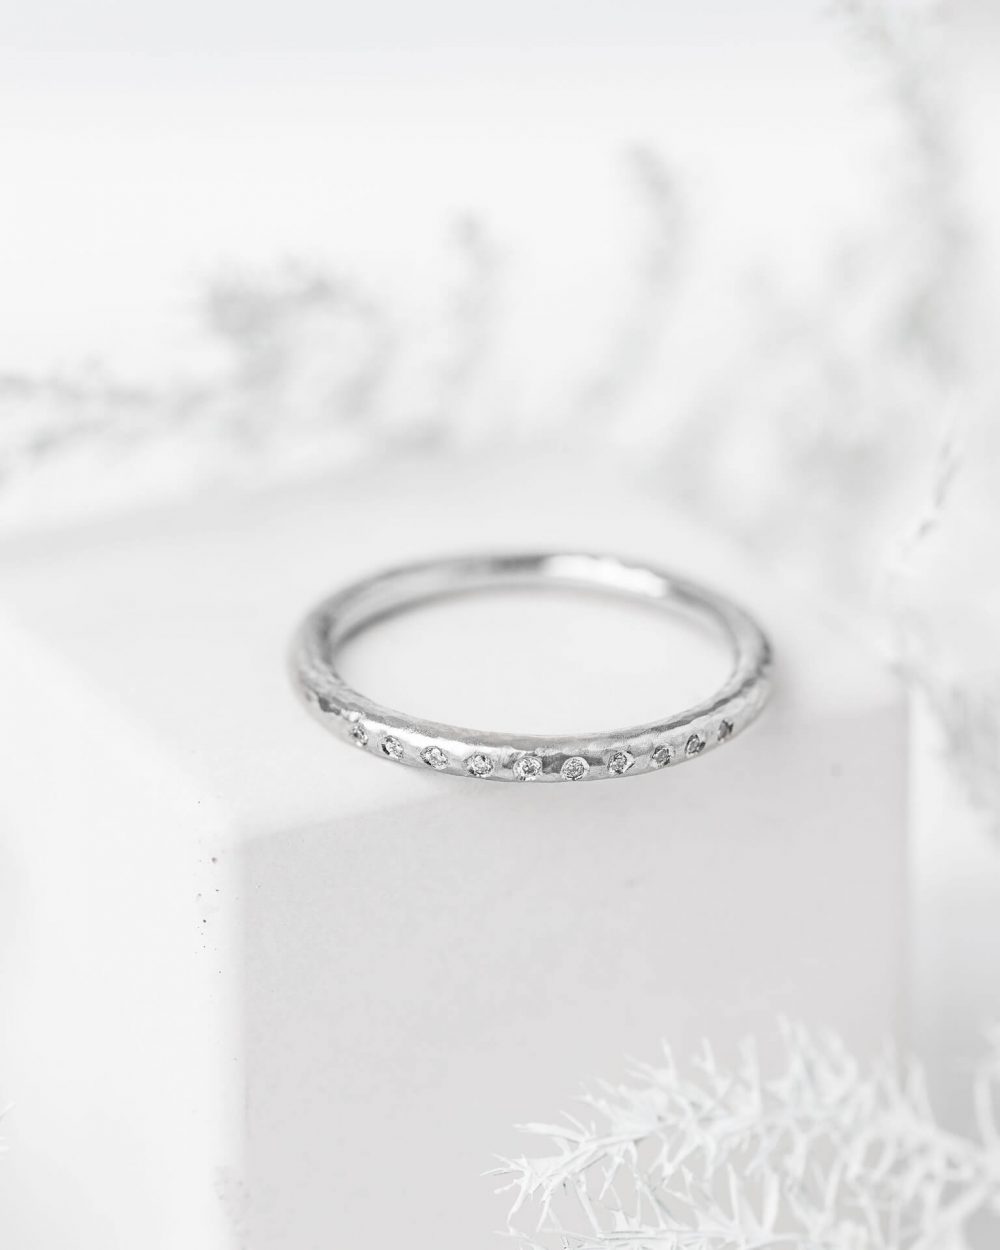 Hammered Diamond Wedding Ring Handmade In Platinum And Set With Ten Sparkle Diamonds, Pictured On Cube. Designed By Bristol Jeweller Jacks Turner.